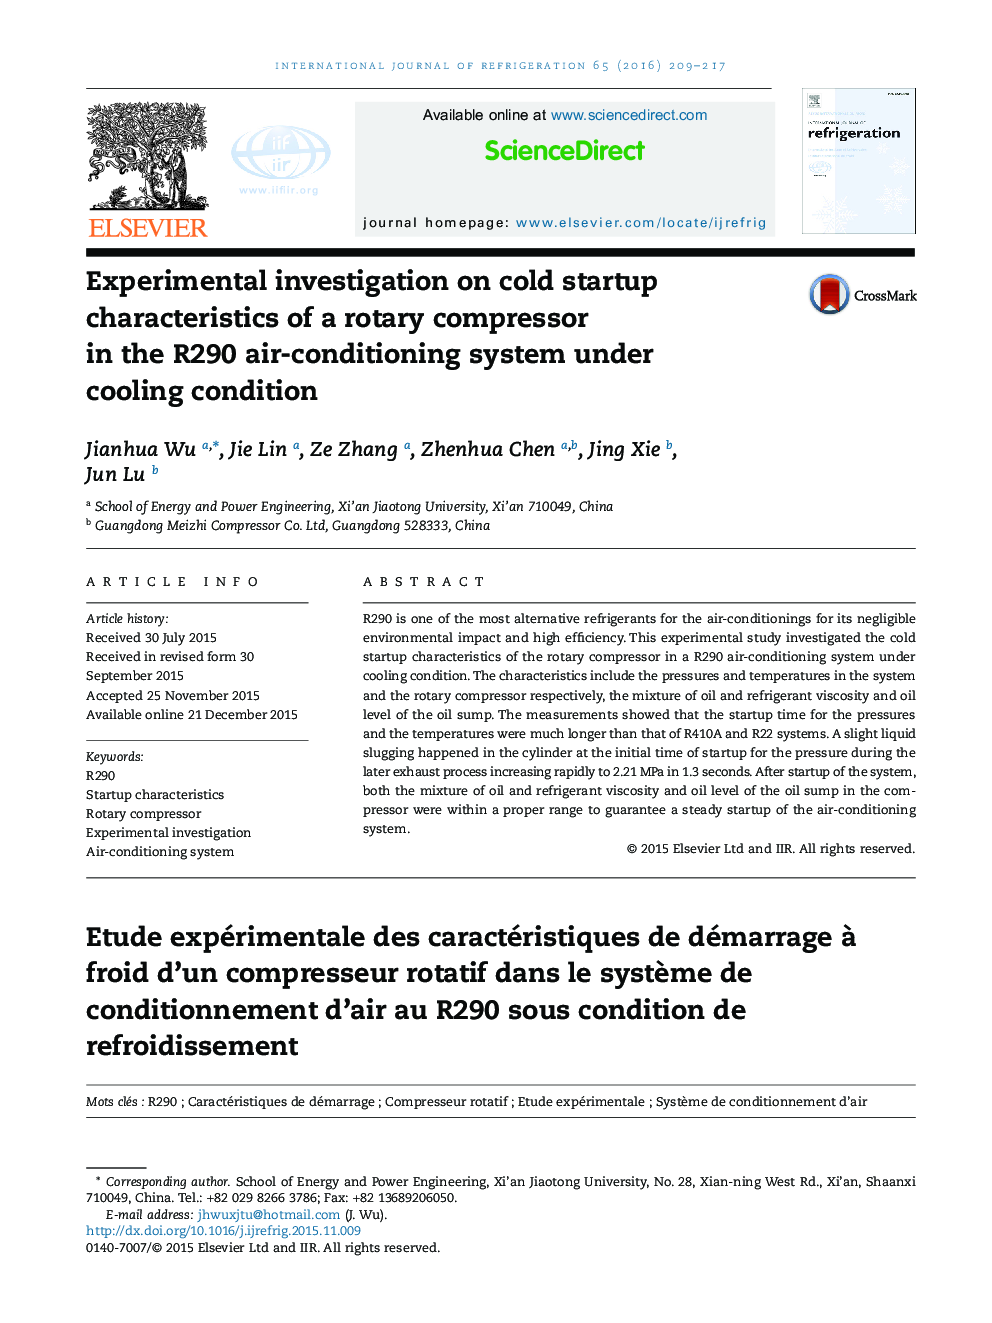 Experimental investigation on cold startup characteristics of a rotary compressor in the R290 air-conditioning system under cooling condition